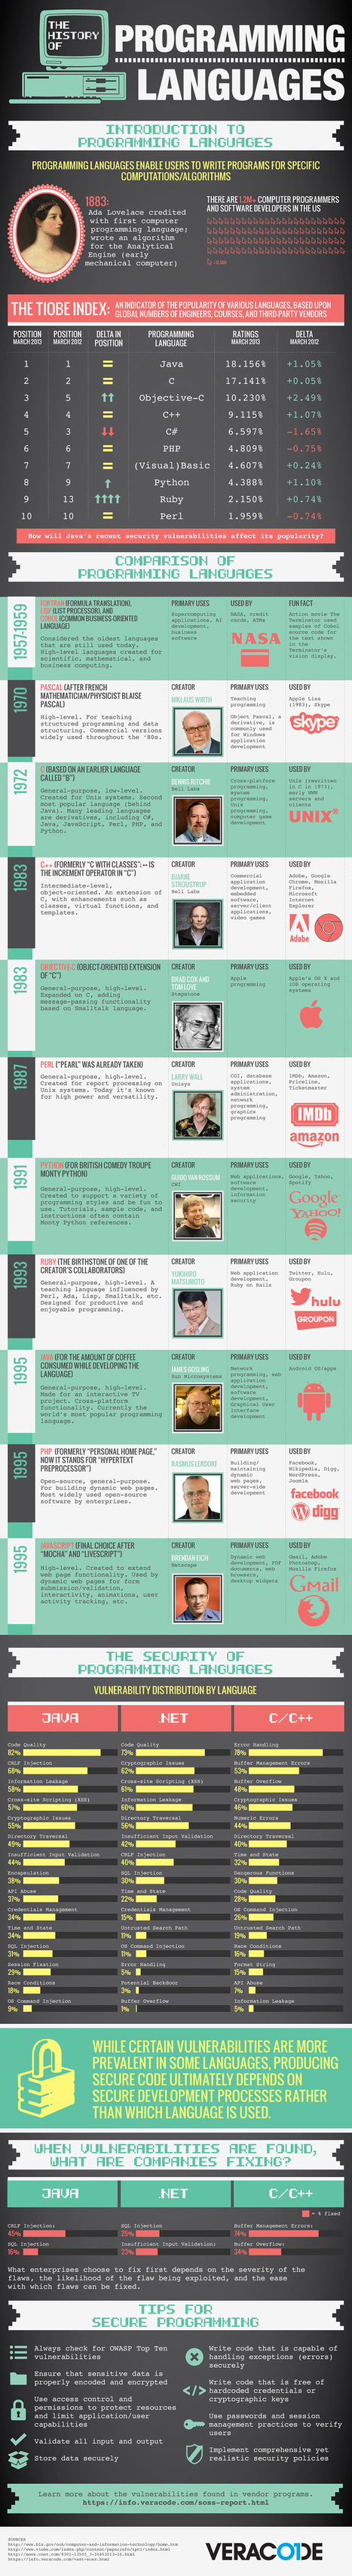 The history of programming languages (infographic) | 21st Century Learning and Teaching | Scoop.it